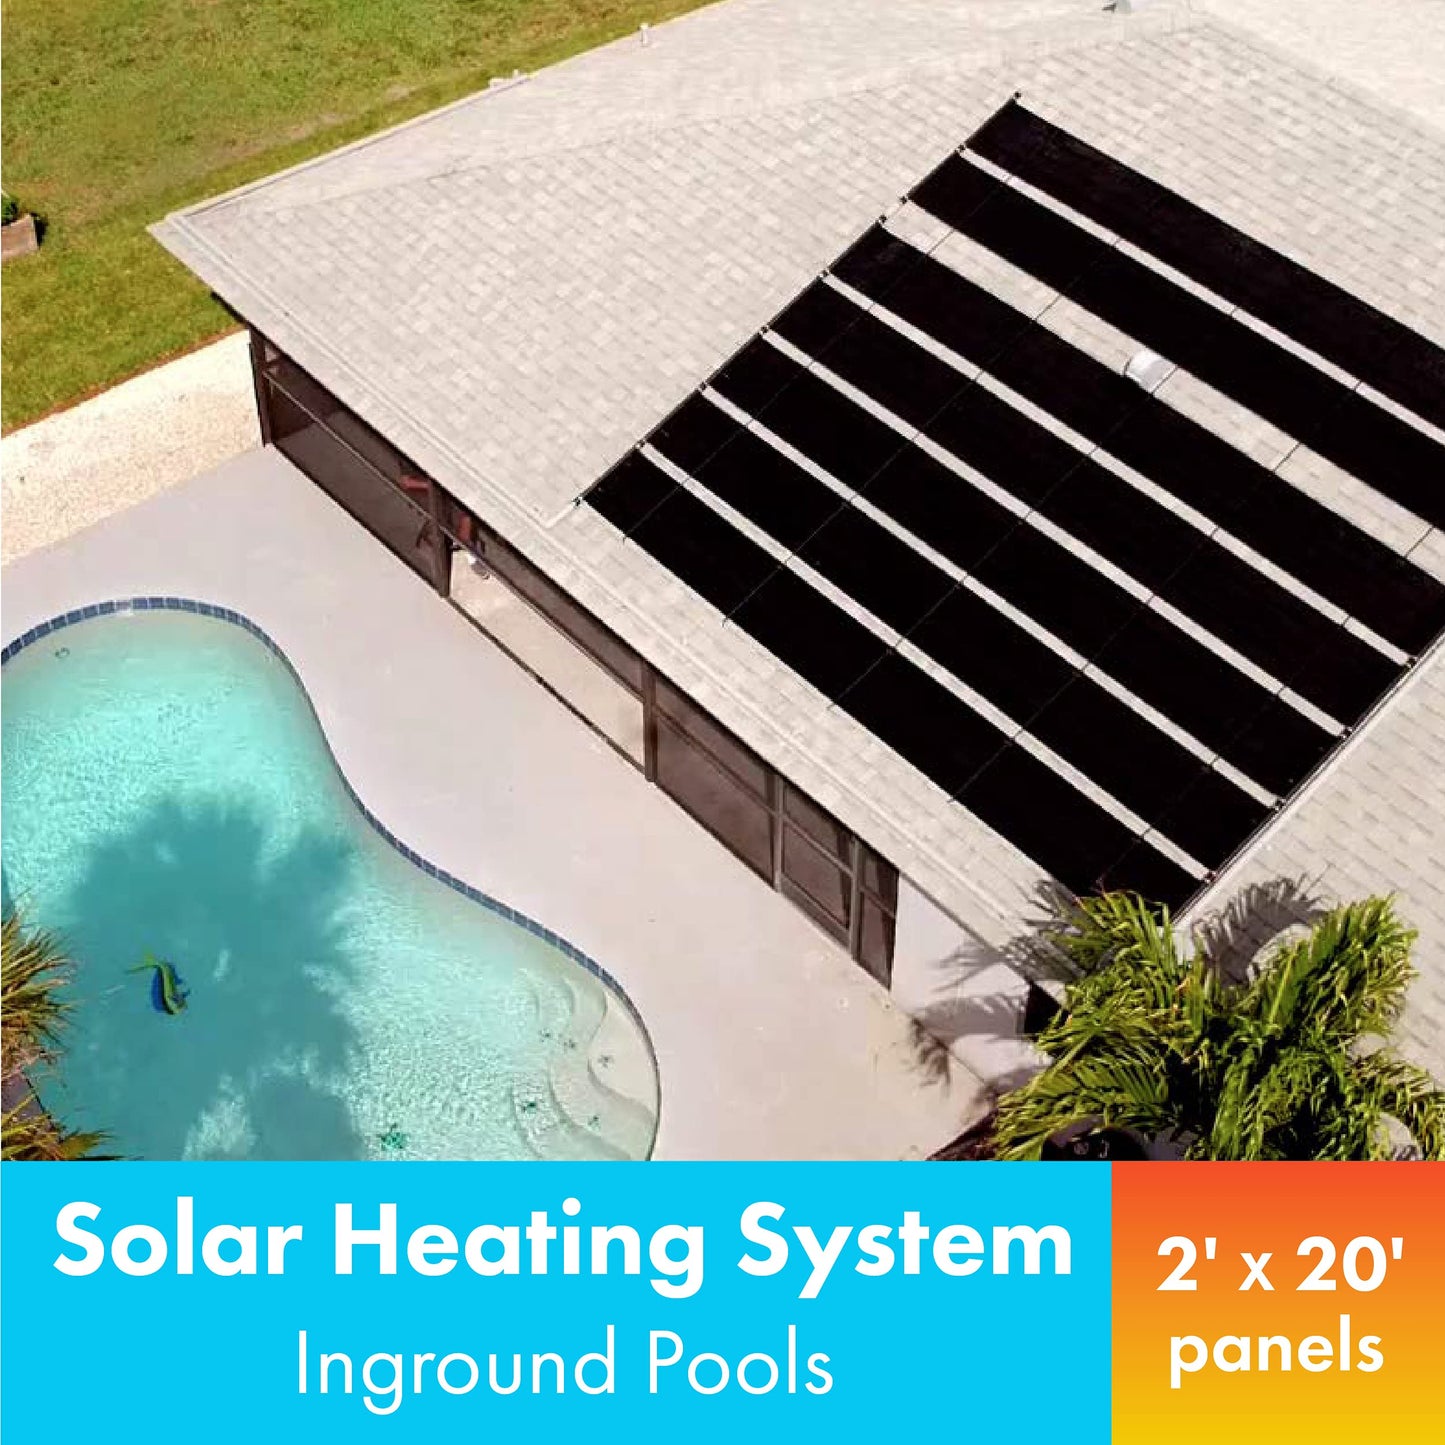 Smart Pool S601 Inground Pool Solar Heating System, Includes Two 2’ x 20’ Panels (80 sq. ft.) – Made of Durable Polypropylene, Raises Temperature Up to 15°F – S601P, Pack of 1, Black